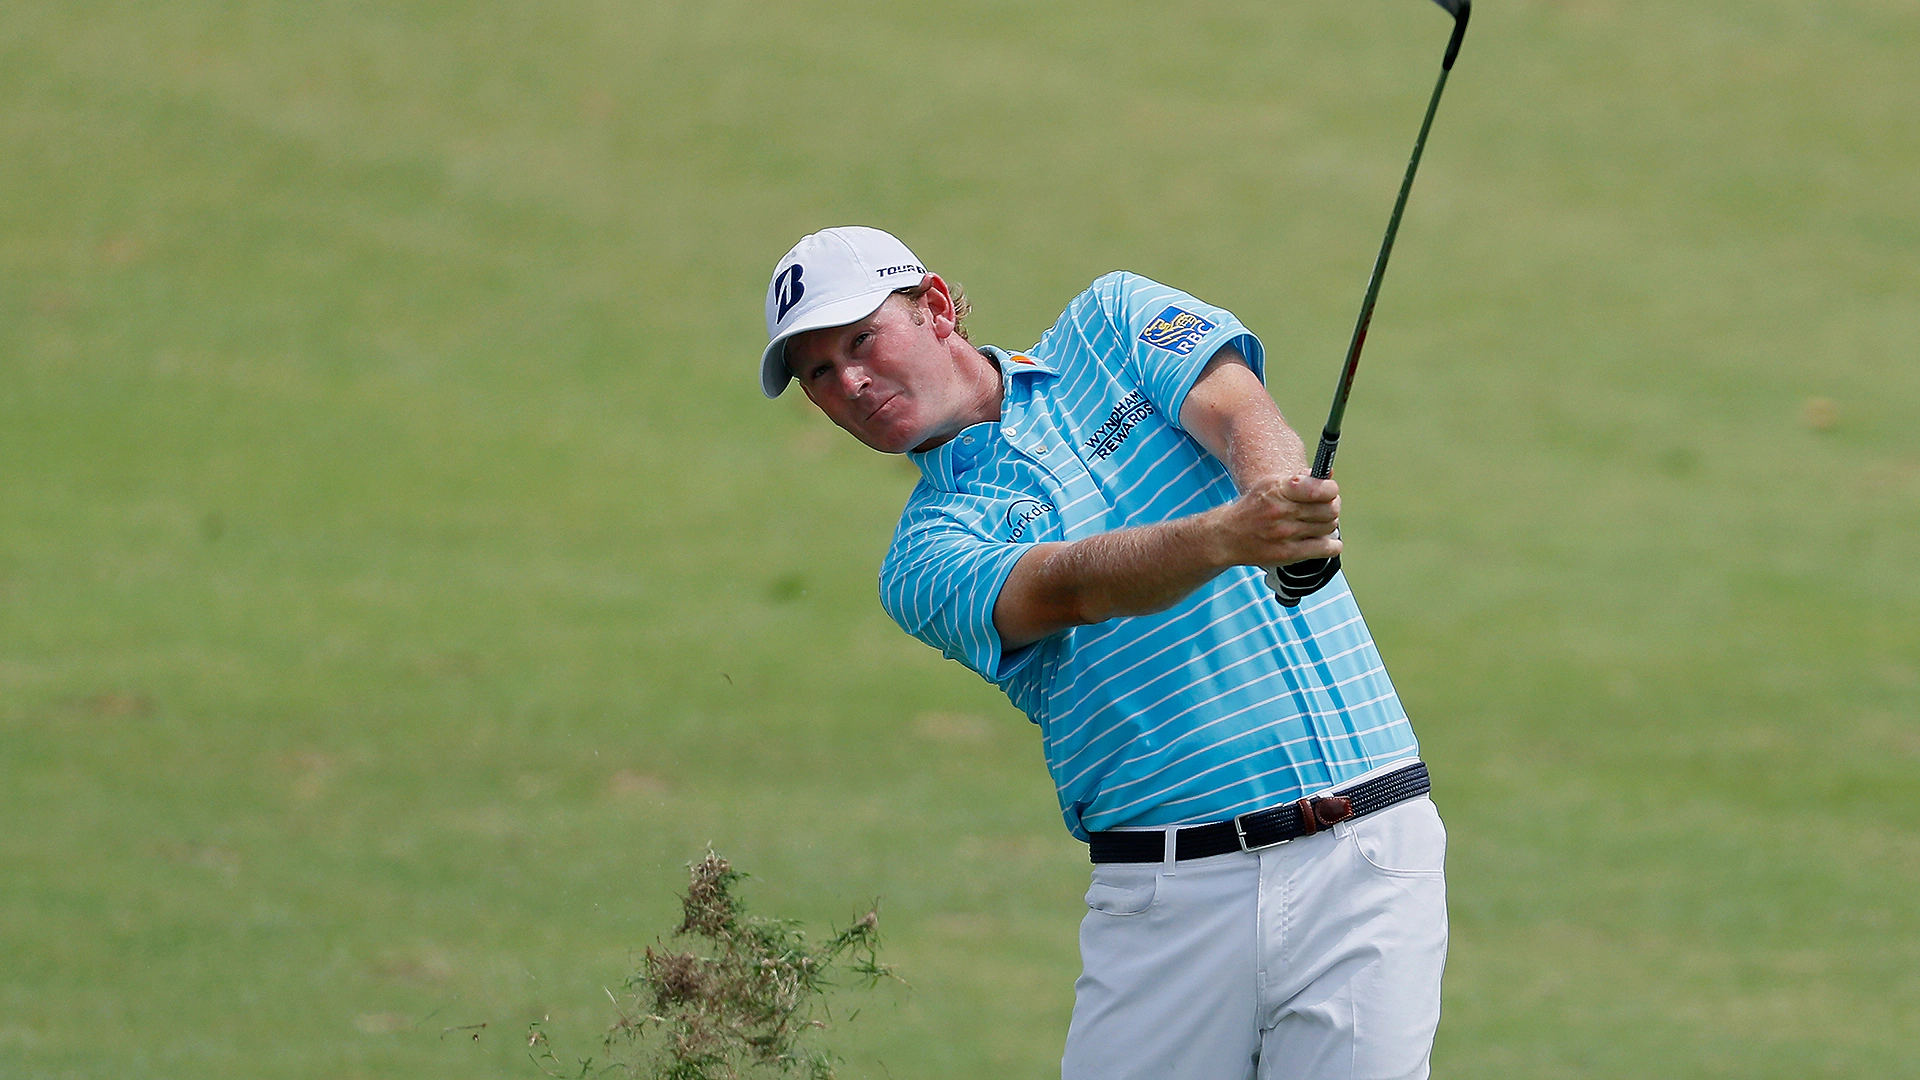 New 'Mr. 59' Snedeker needs Day 2 rally to keep Wyndham lead